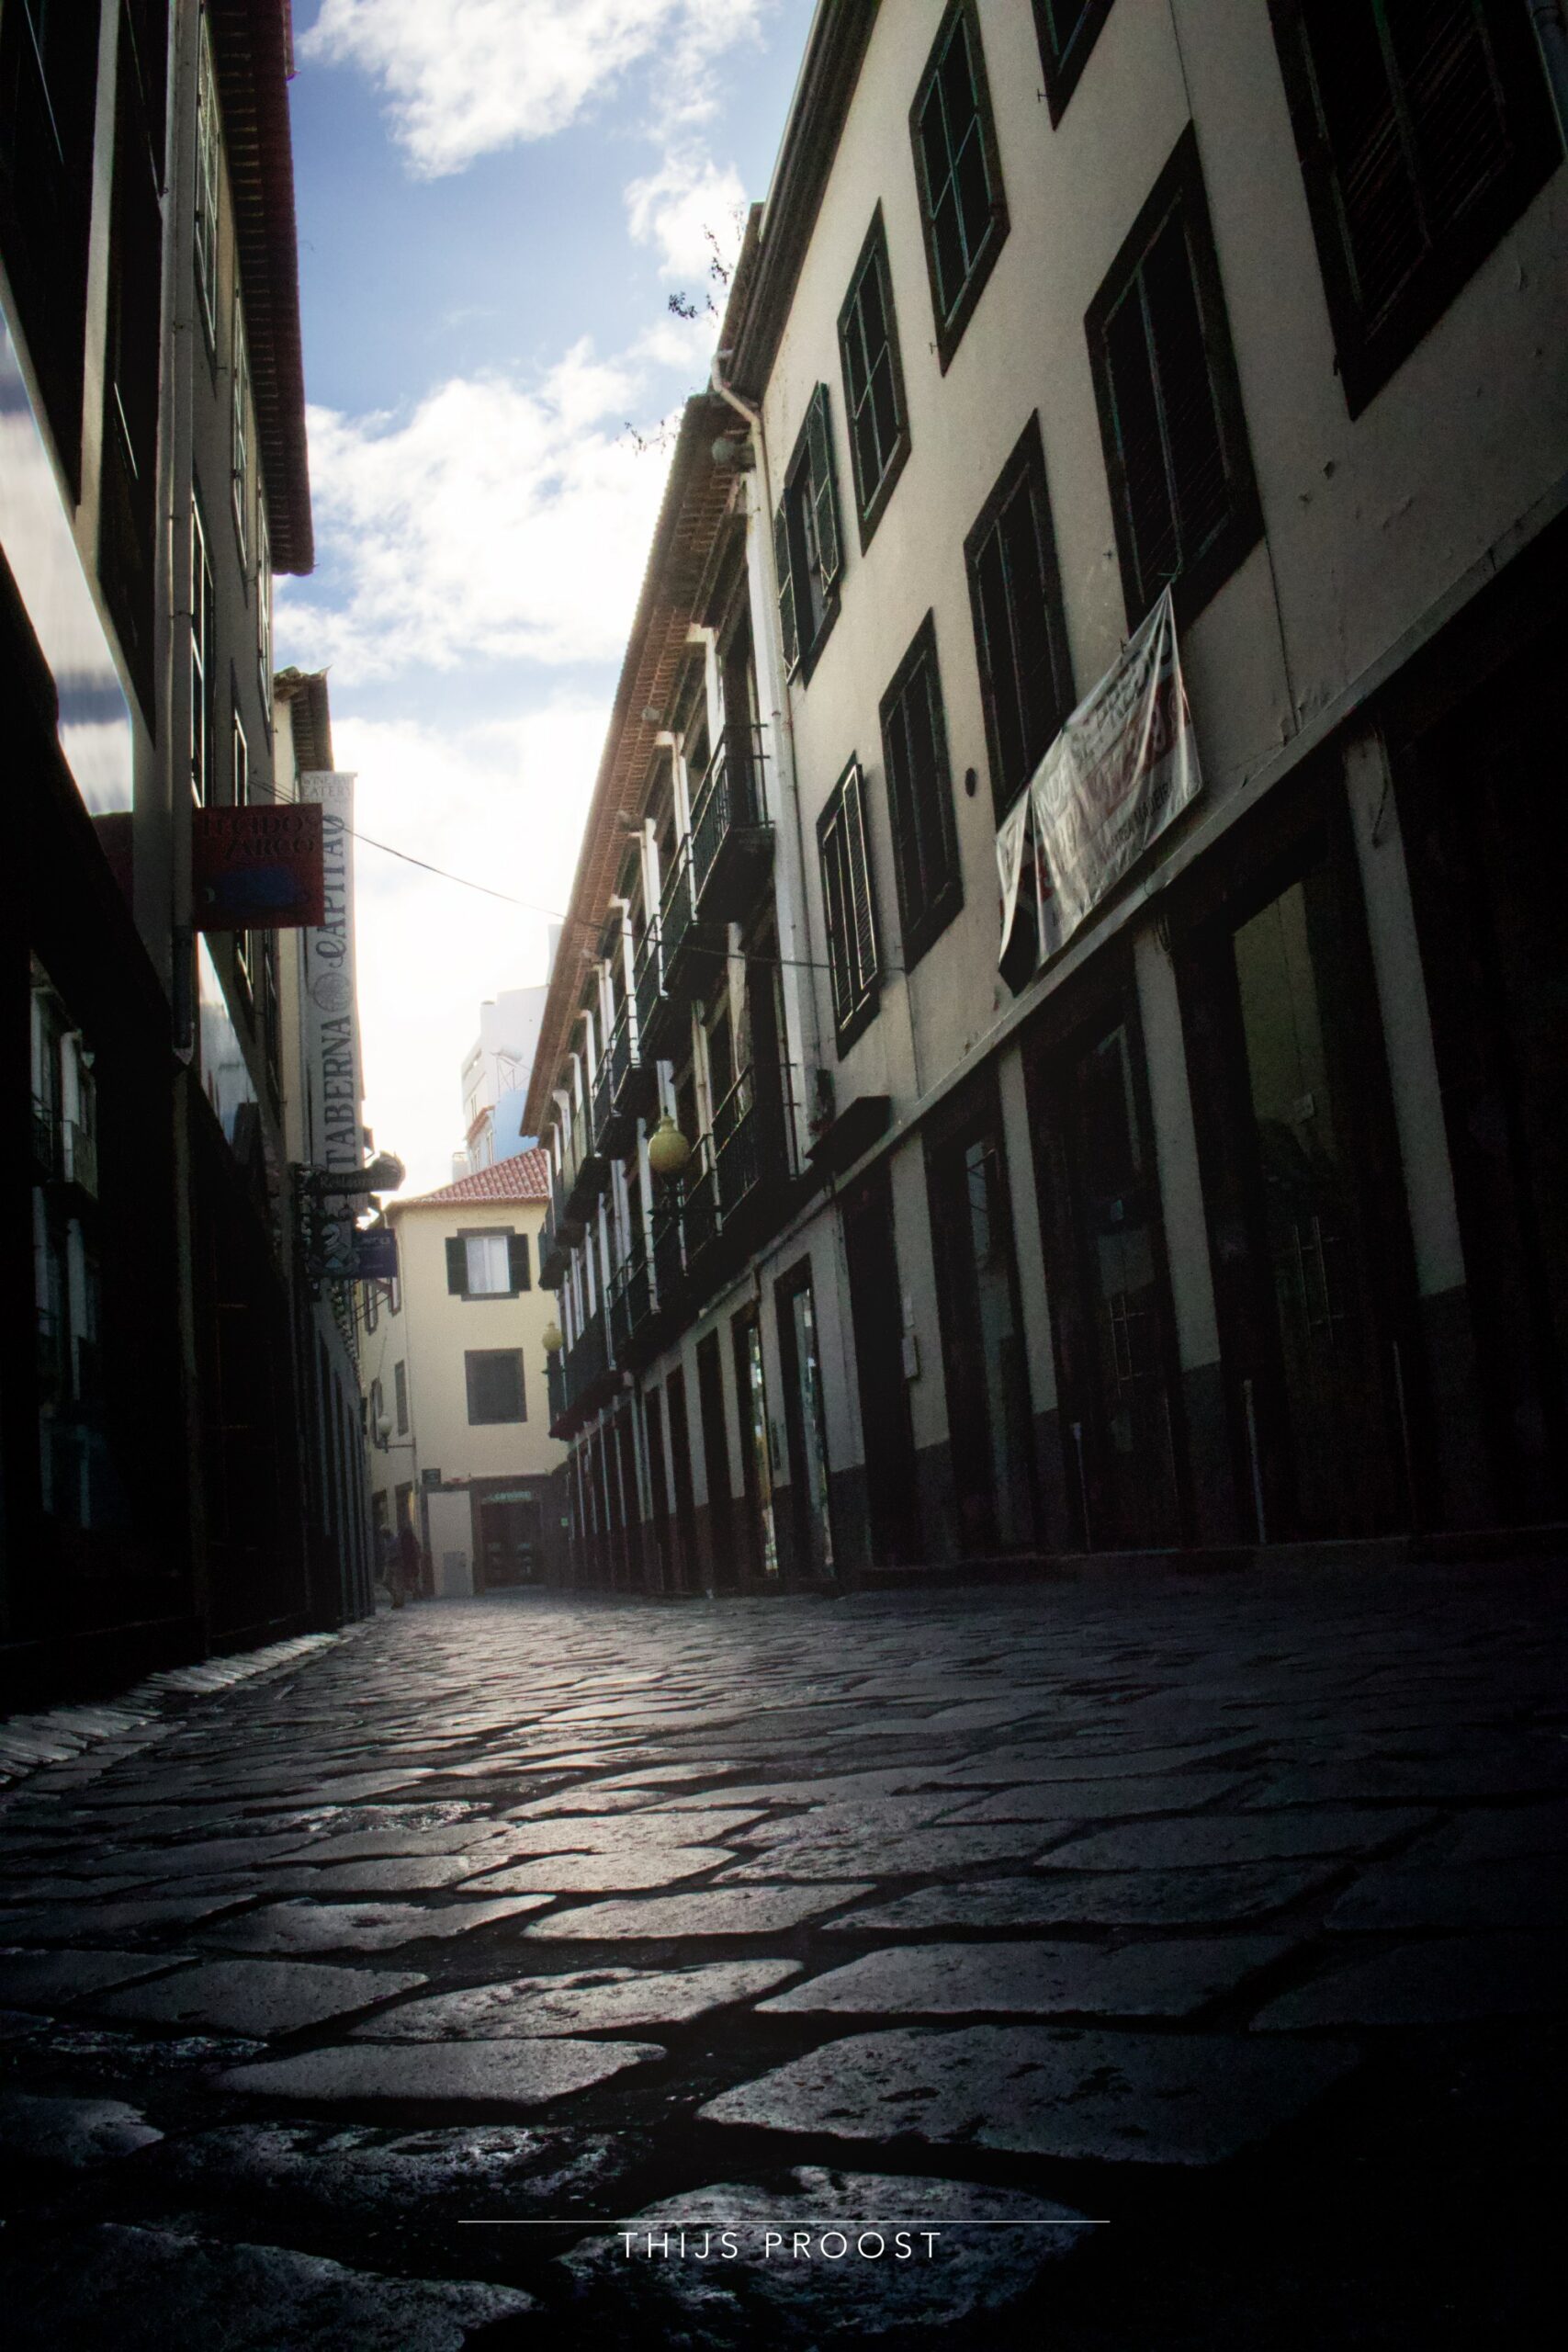 A view of a street in the center of Funchal Madiera. Taken low from the ground right above cobblestones. The sky is visible as a stripe.